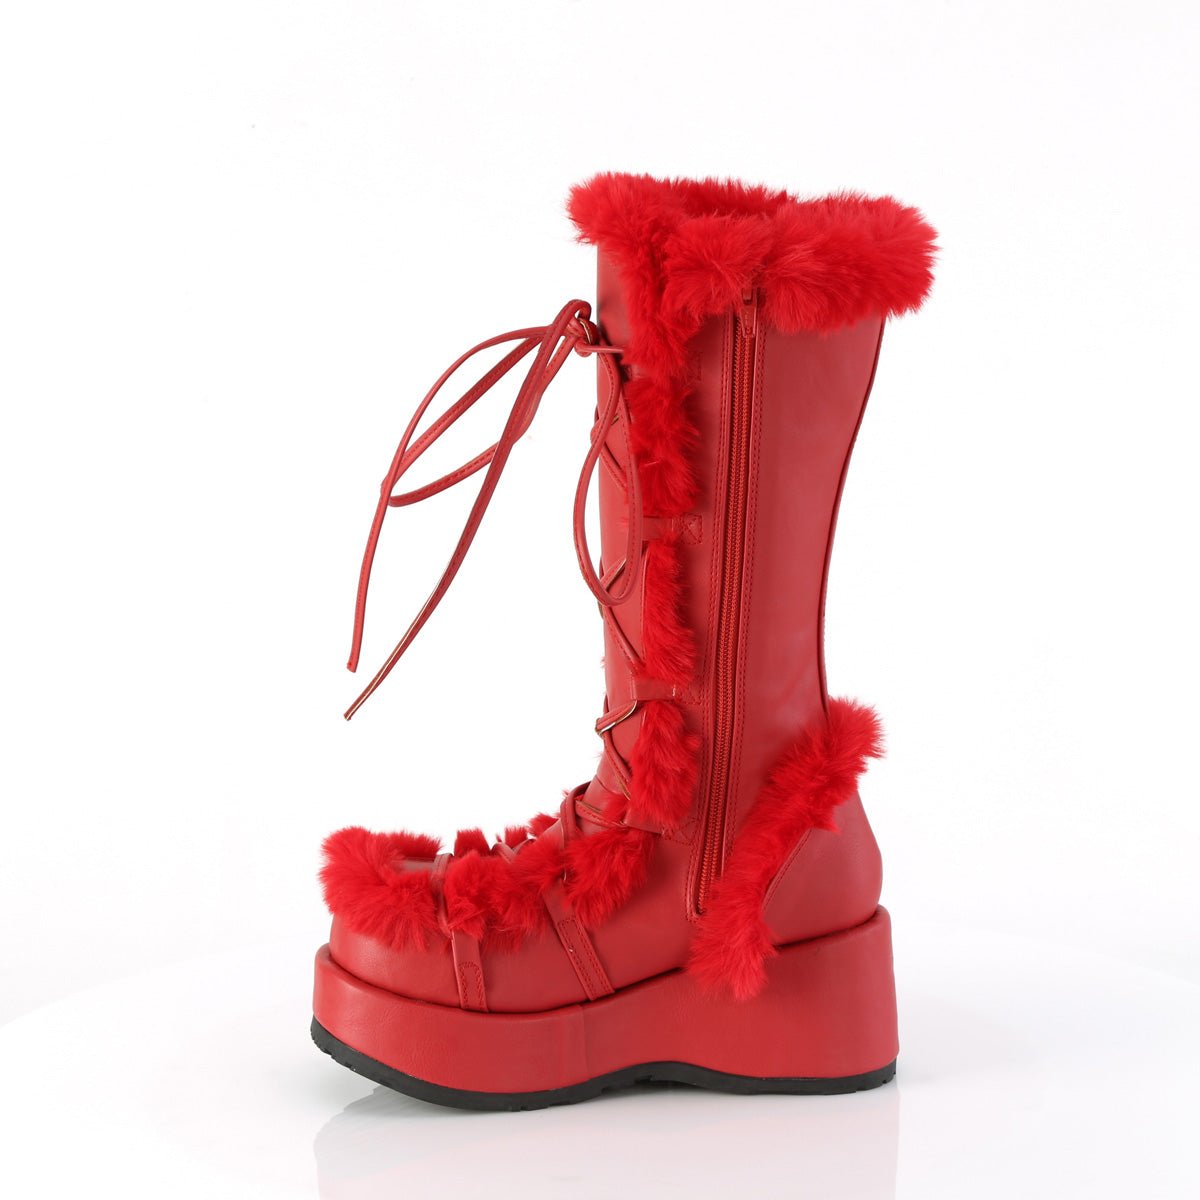 Too Fast | Demonia Cubby 311 | Red Vegan Leather Women's Mid Calf Boots